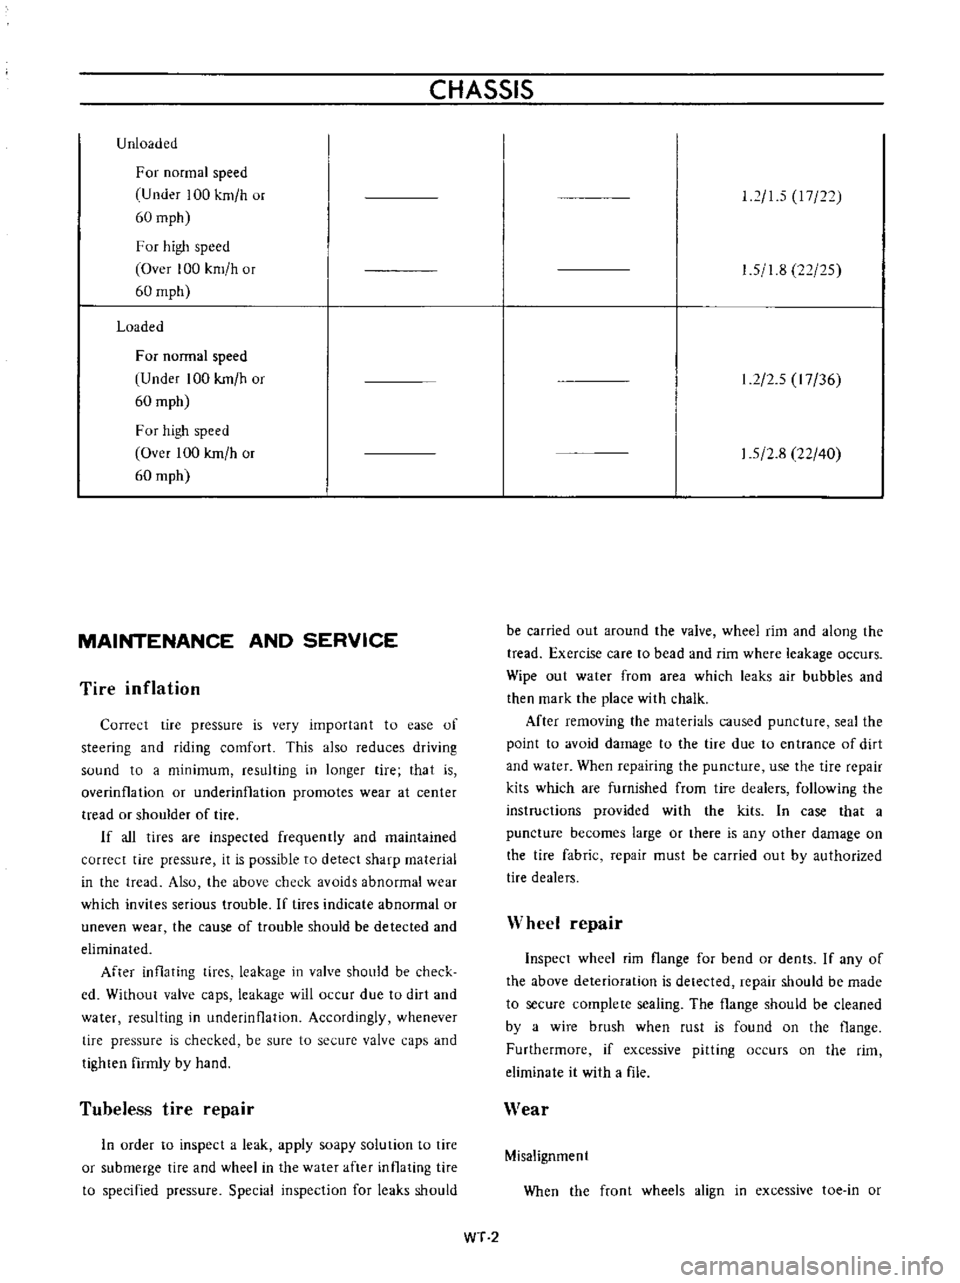 DATSUN B110 1973  Service Repair Manual 
CHASSIS

Unloaded

For

normal

speed

U

nder 
100

km 
h 
or

60

mph

F 
or

high

speed

Over 
100

km 
h

or

60

mph

Loaded

For 
normal

speed

Under 
100

kmlh 
or

60

mph

For

high 
speed